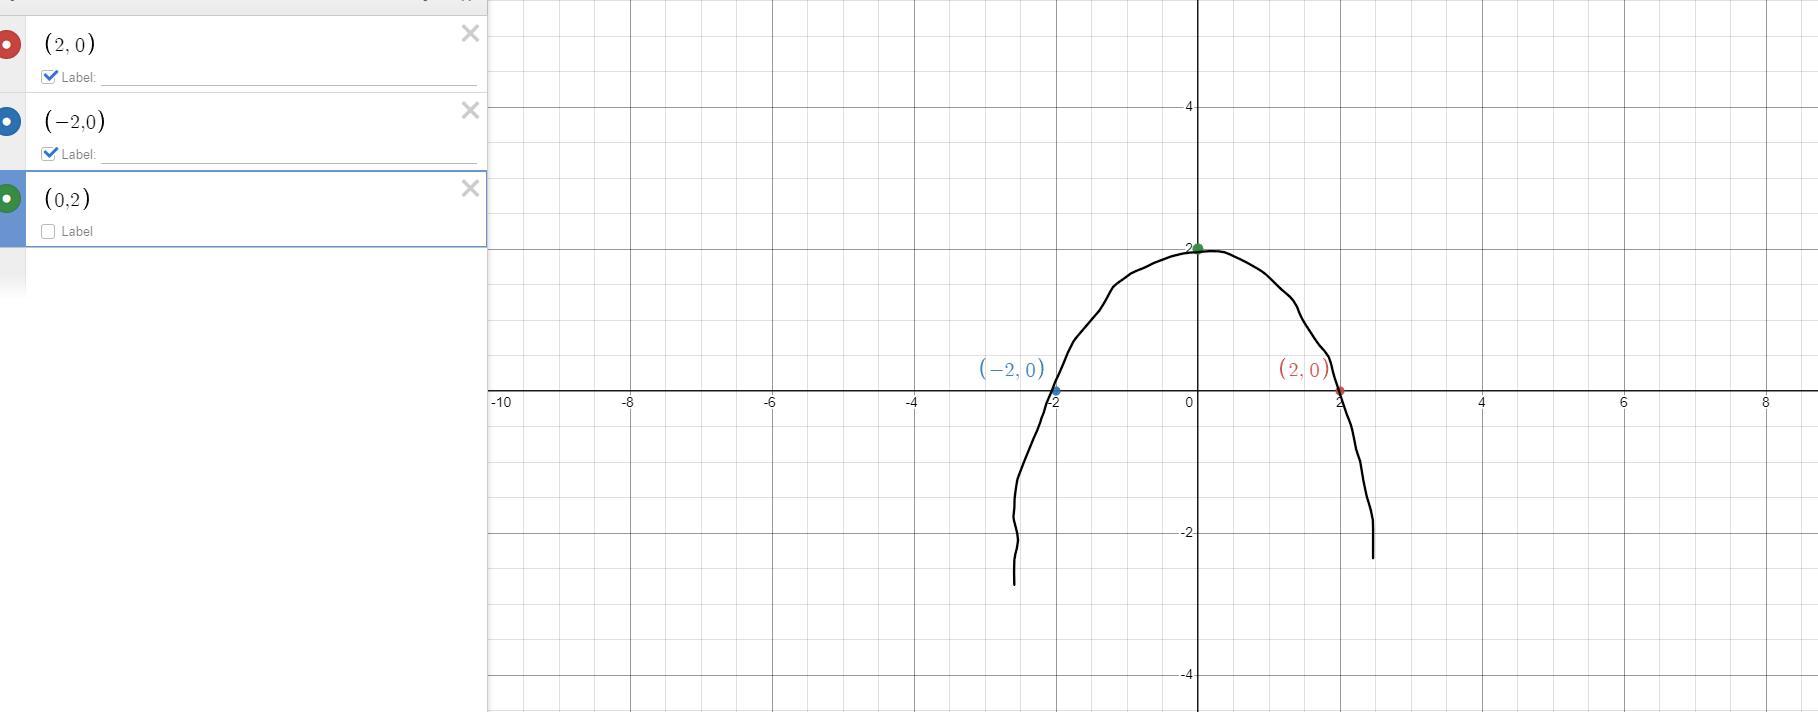 Sketch A Graph Of A Quadratic Function That Has A Maximum Value Of (0, 2) And X-intercepts When X = +2.